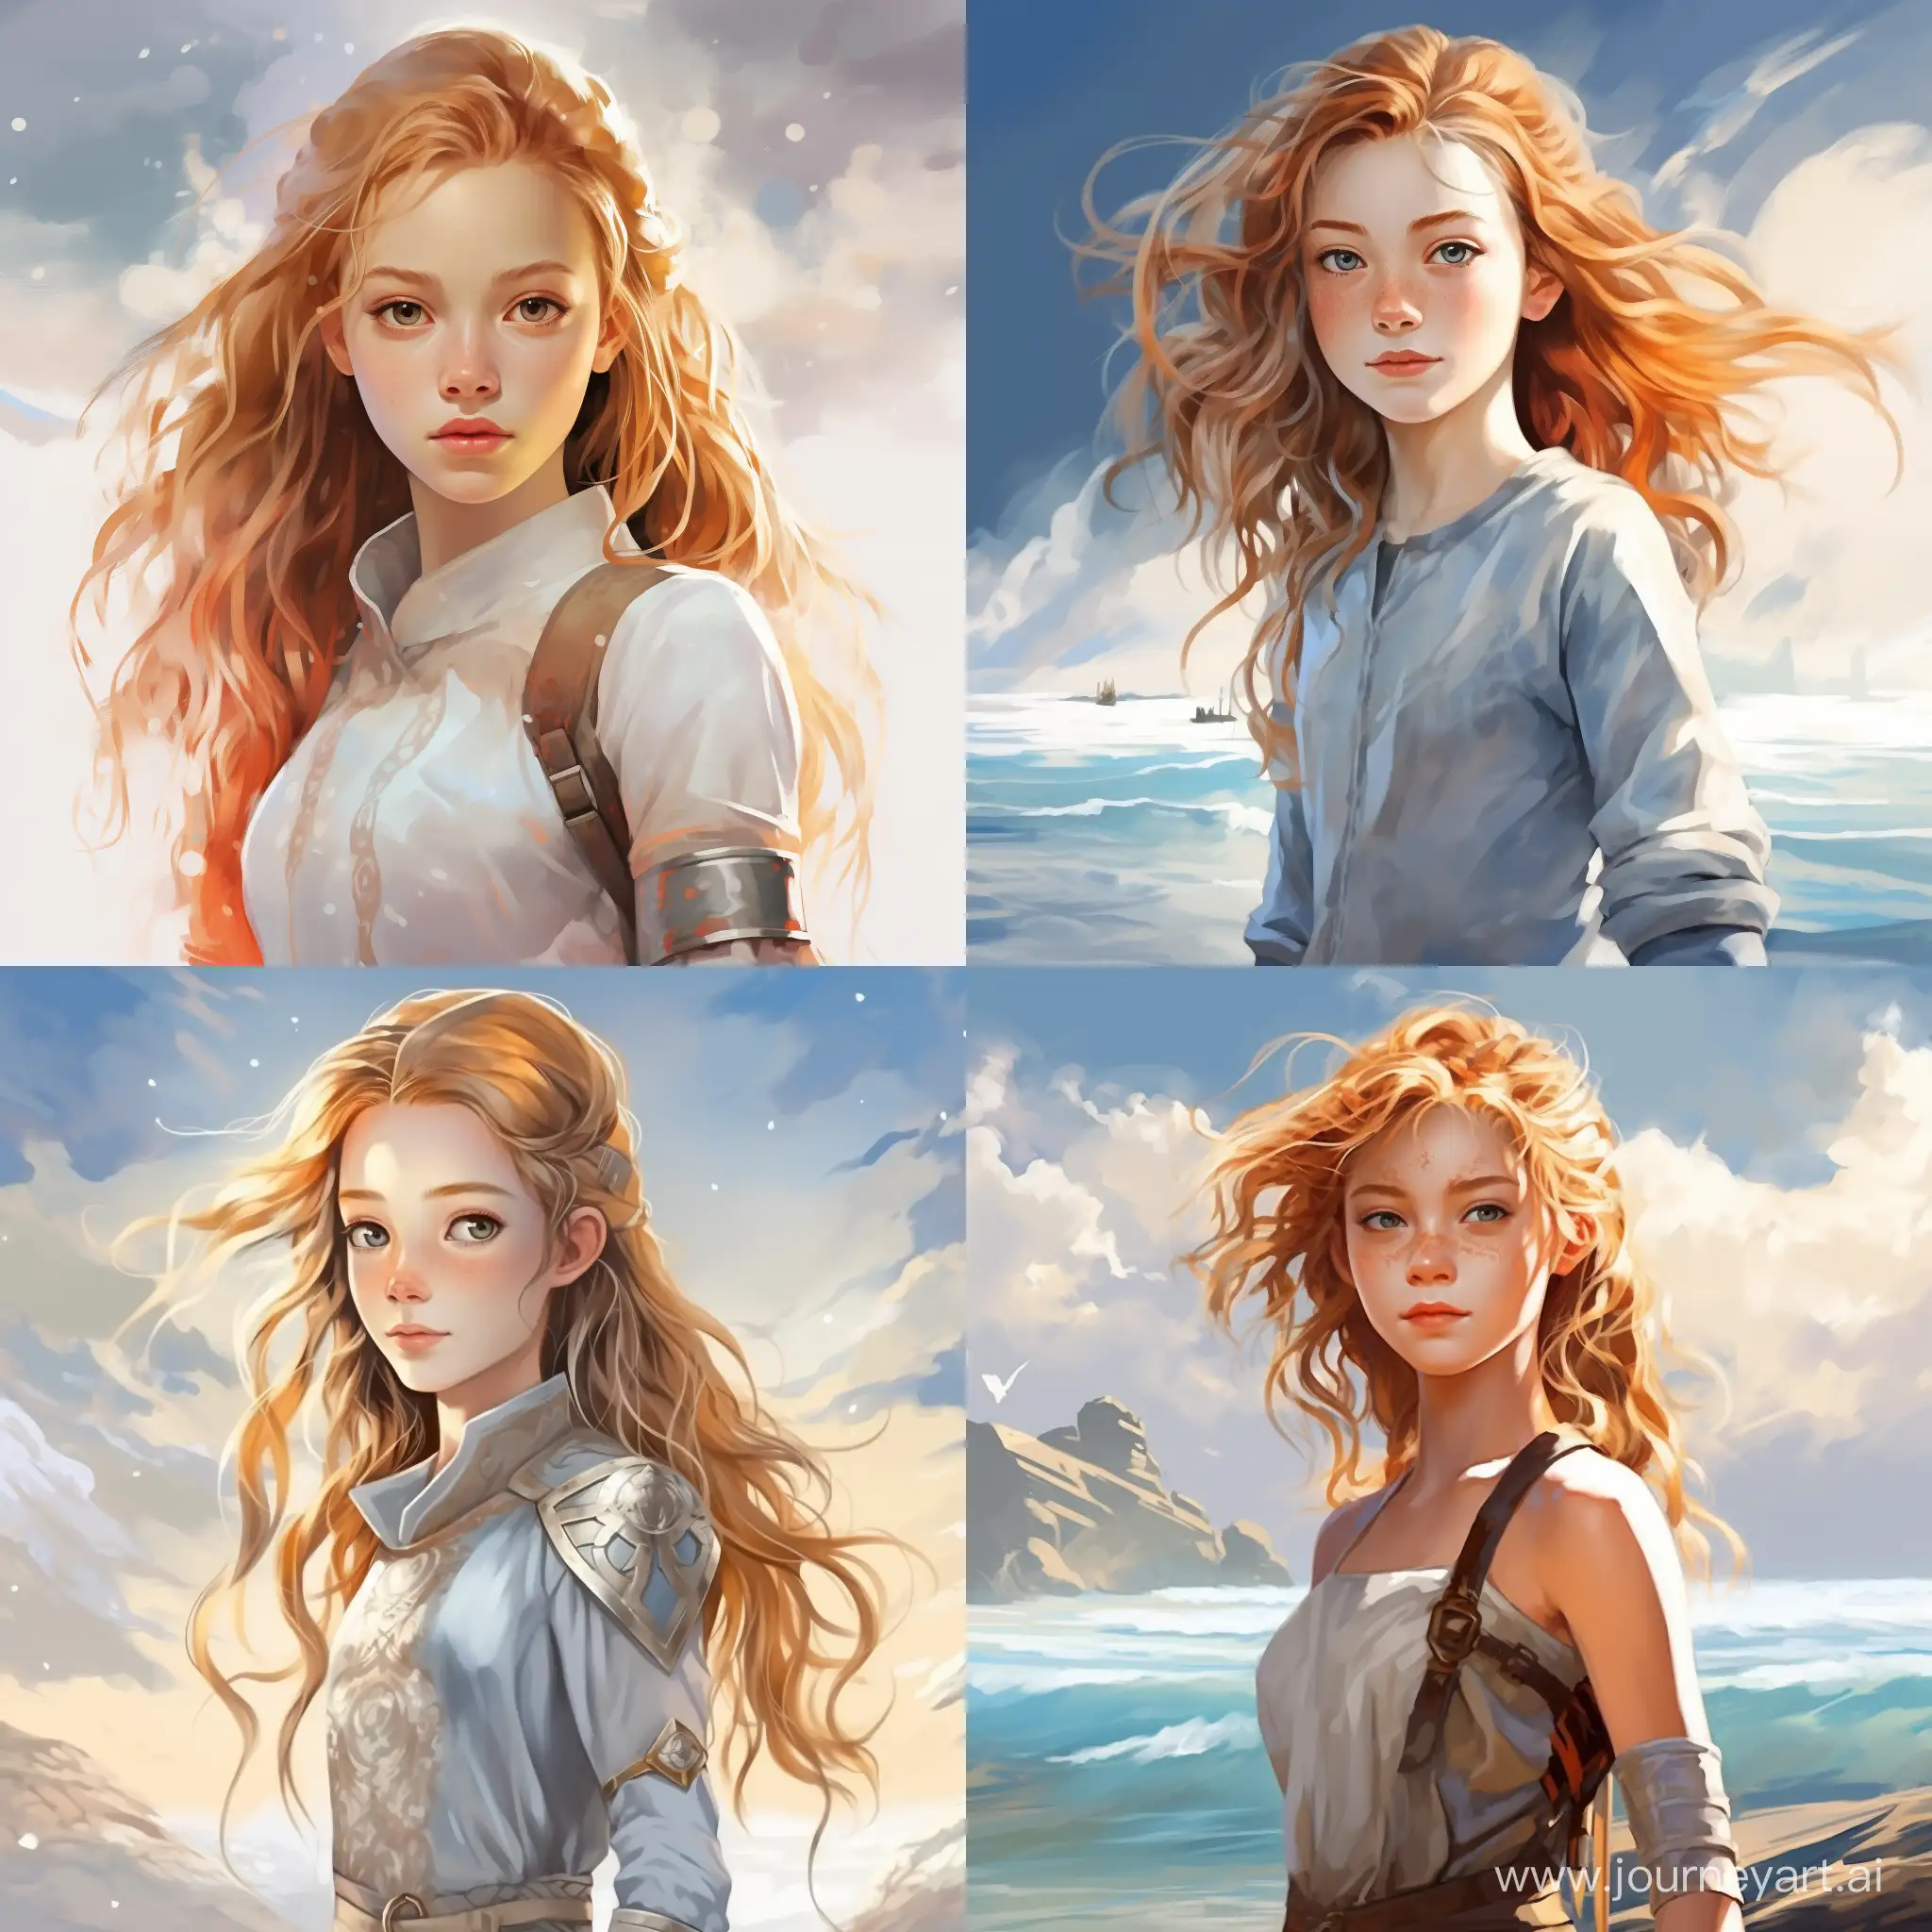 Beautiful girl, golden hair, gray-blue eyes, snow-white skin, teenager, 14 years old, avatar style legend of aang, journey near the sea, high quality, high detail, cartoon art